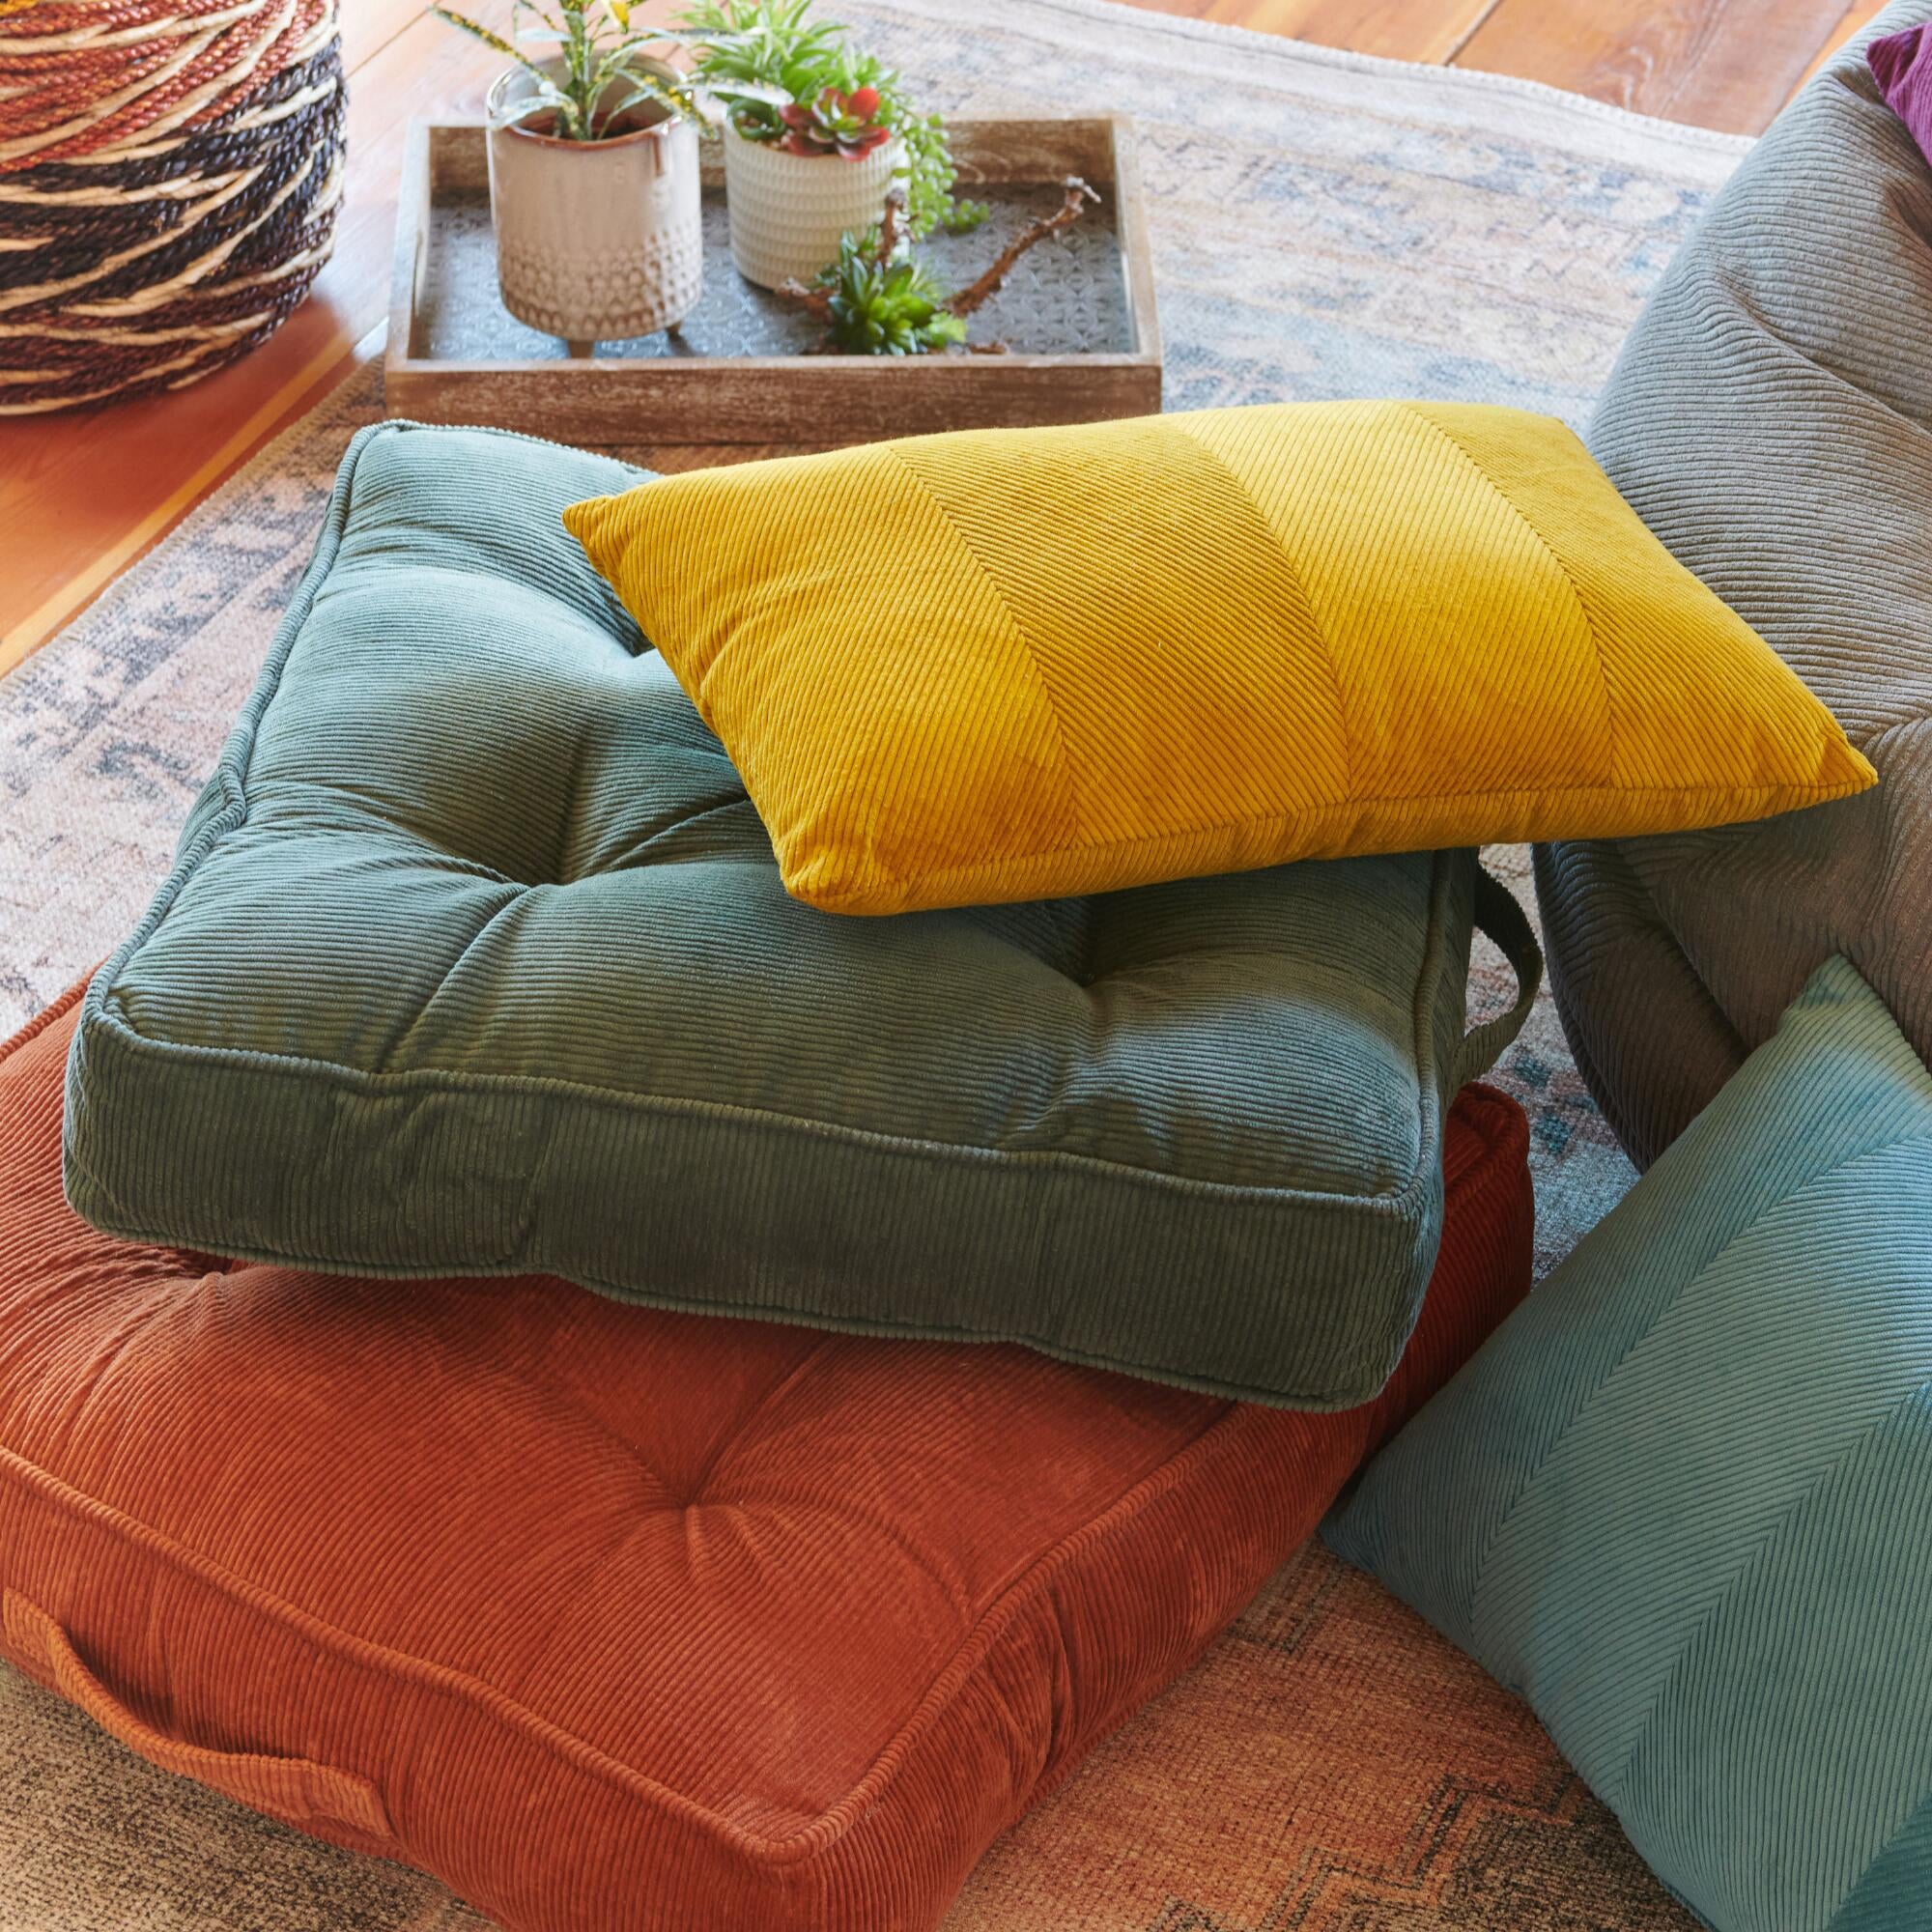 Have a Seat: 10 Floor Cushions That Will Make You Want To!